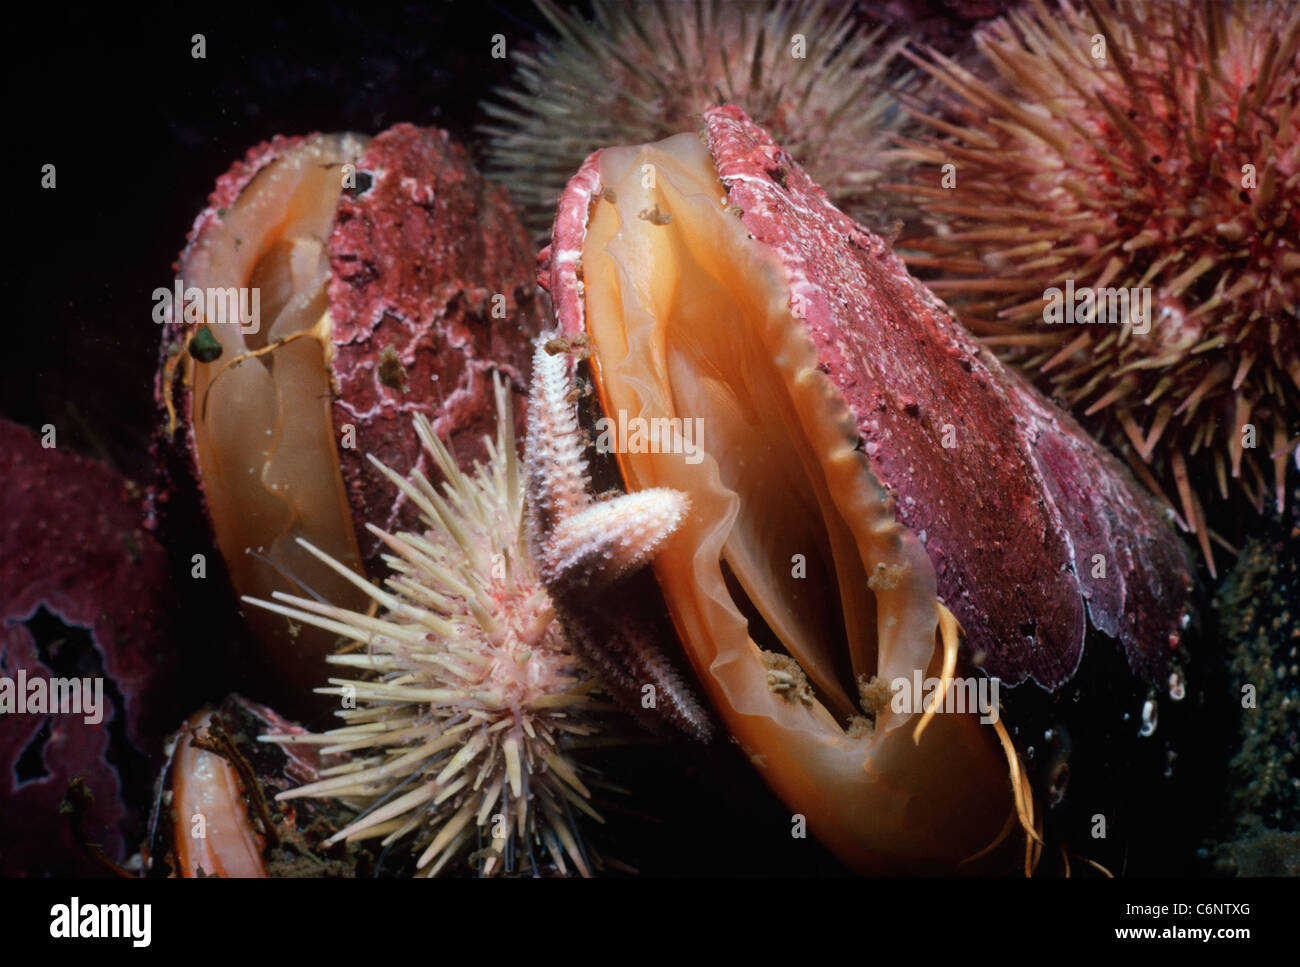 Horse Mussels (Modiolus modiolus) encrusted with Coralline Algae filter feeding on plankton amongst sea urchins and a starfish. Stock Photo